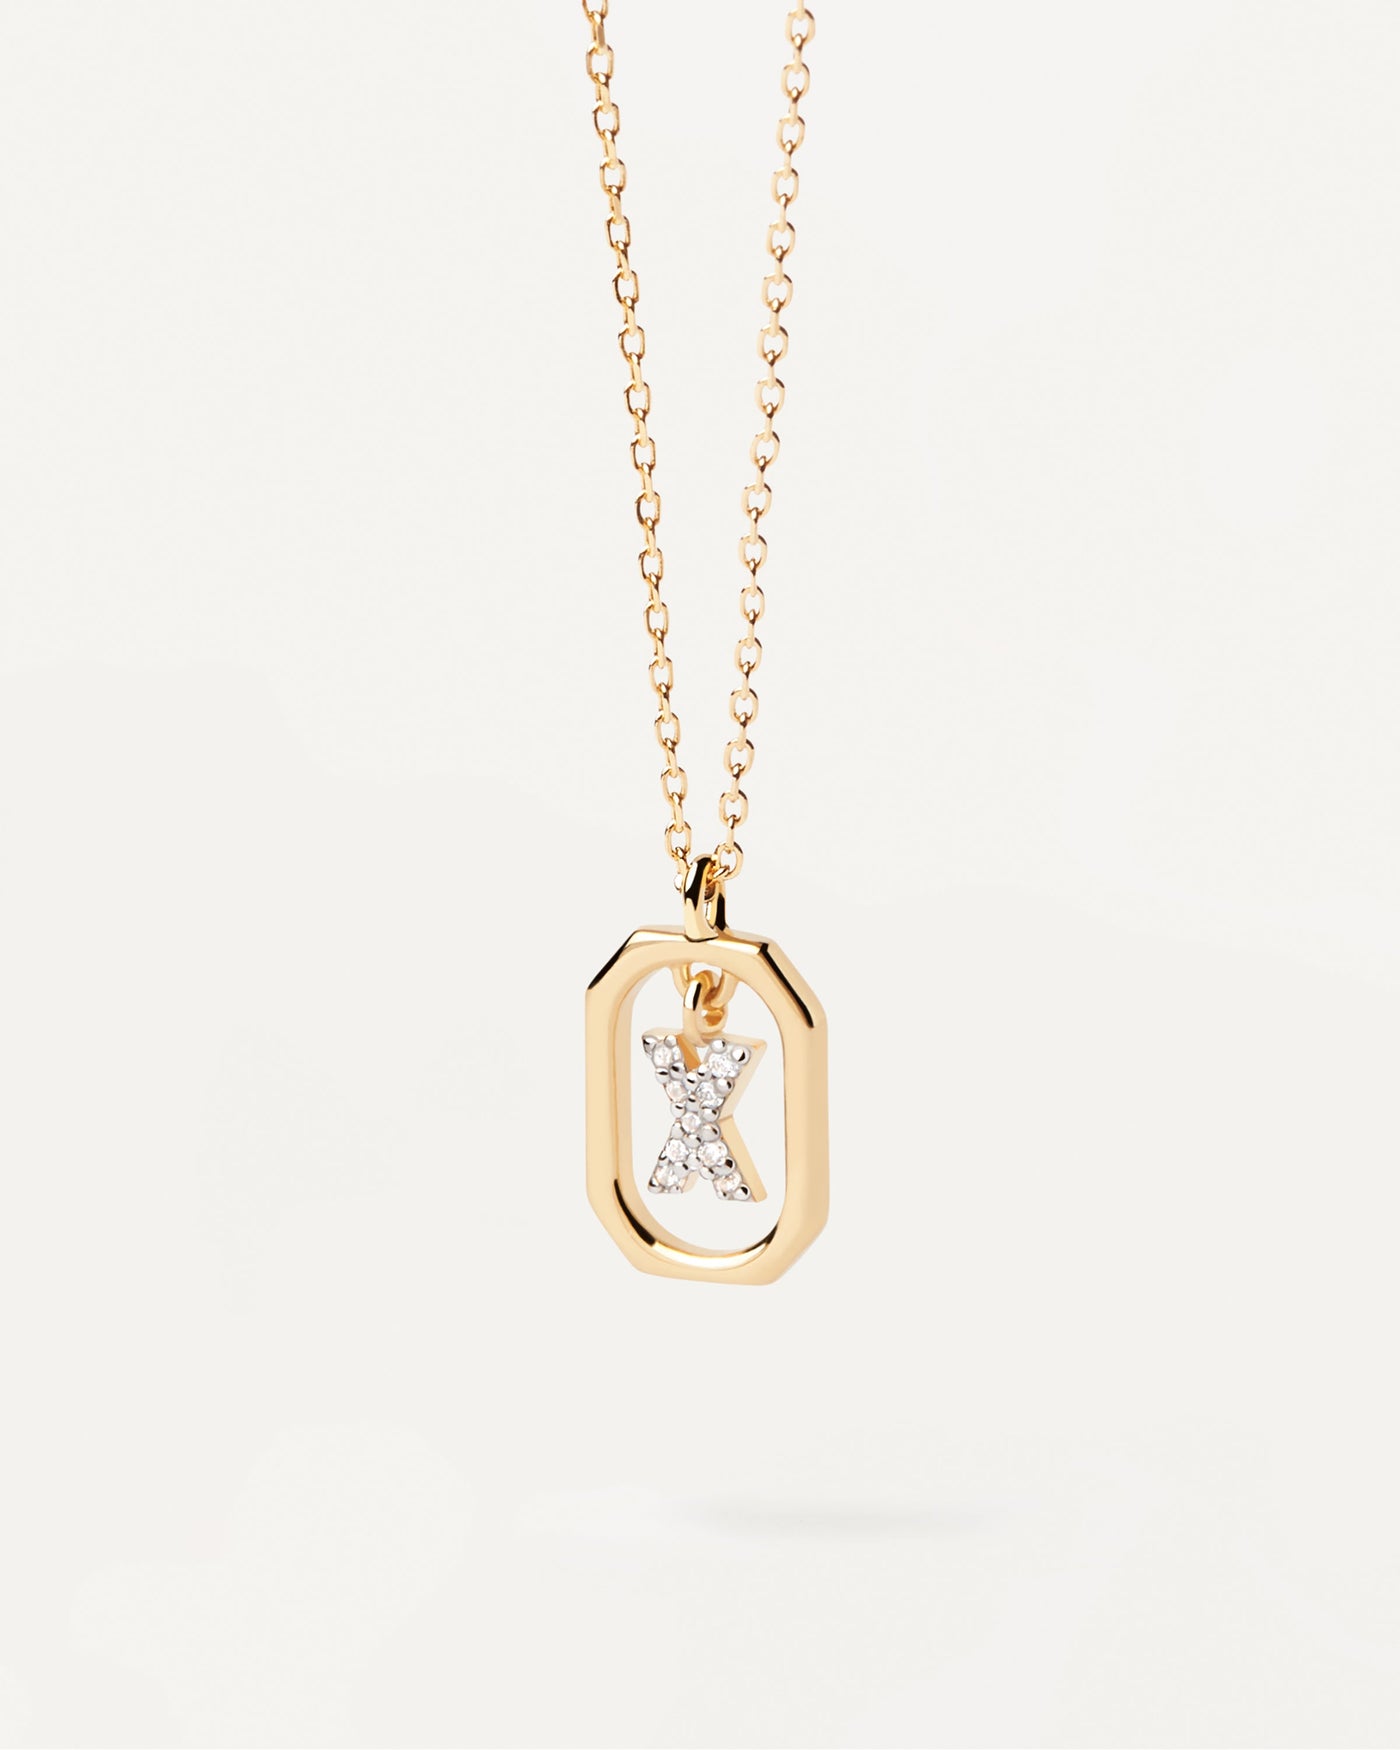 2023 Selection | Mini Letter X Necklace. Small initial X necklace in zirconia inside gold-plated silver octagonal pendant. Get the latest arrival from PDPAOLA. Place your order safely and get this Best Seller. Free Shipping.